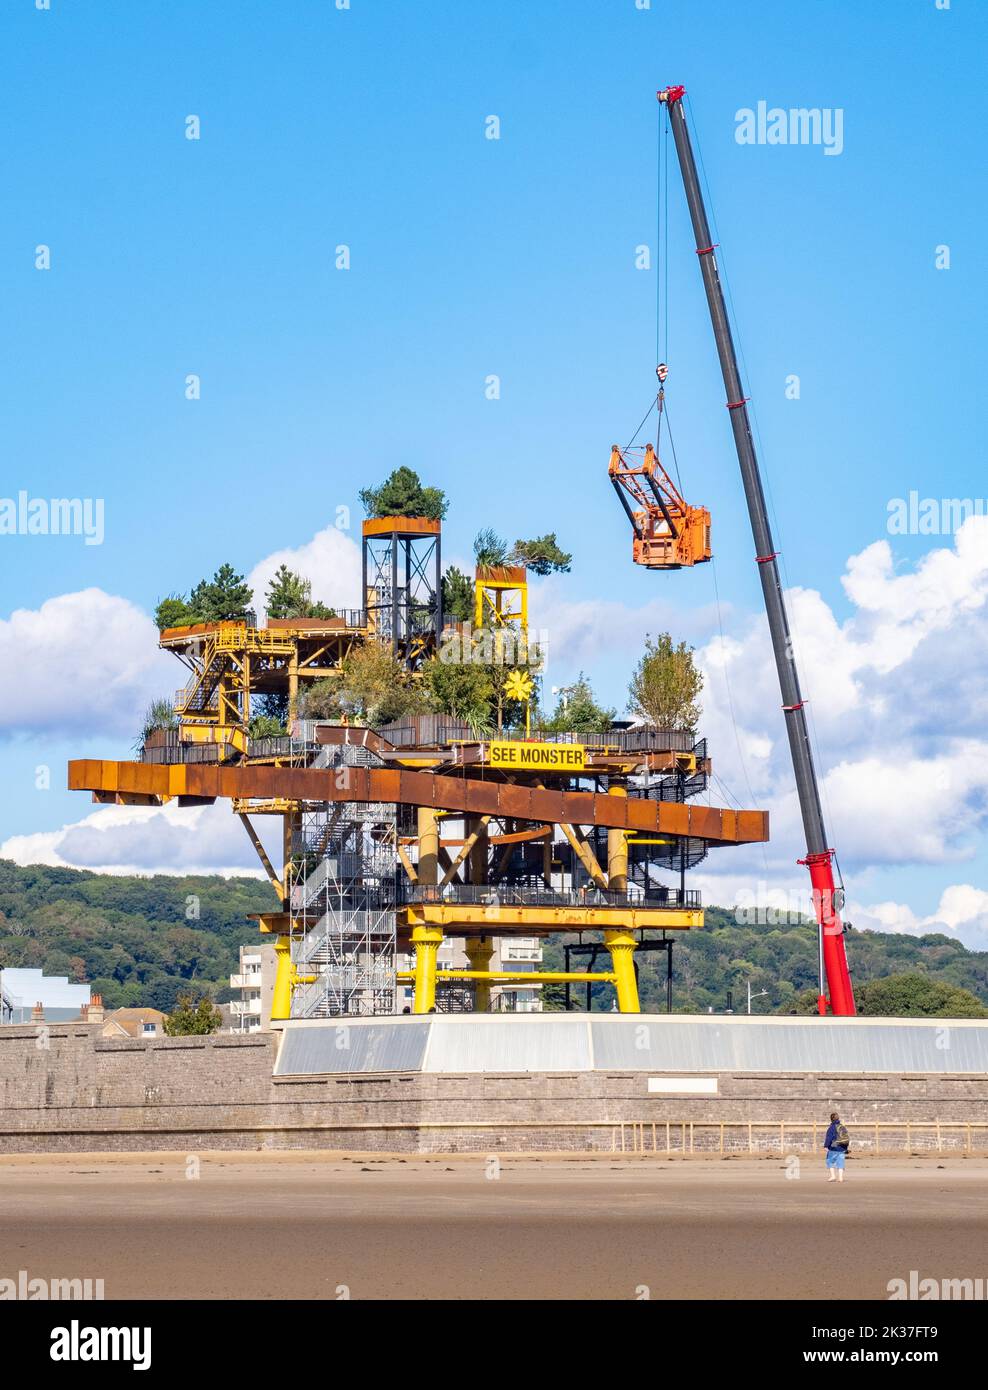 Workmen putting the finishing touches to the See Monster attraction on a gas rig installed in the Tropicana site in Weston super Mare Somerset UK Stock Photo